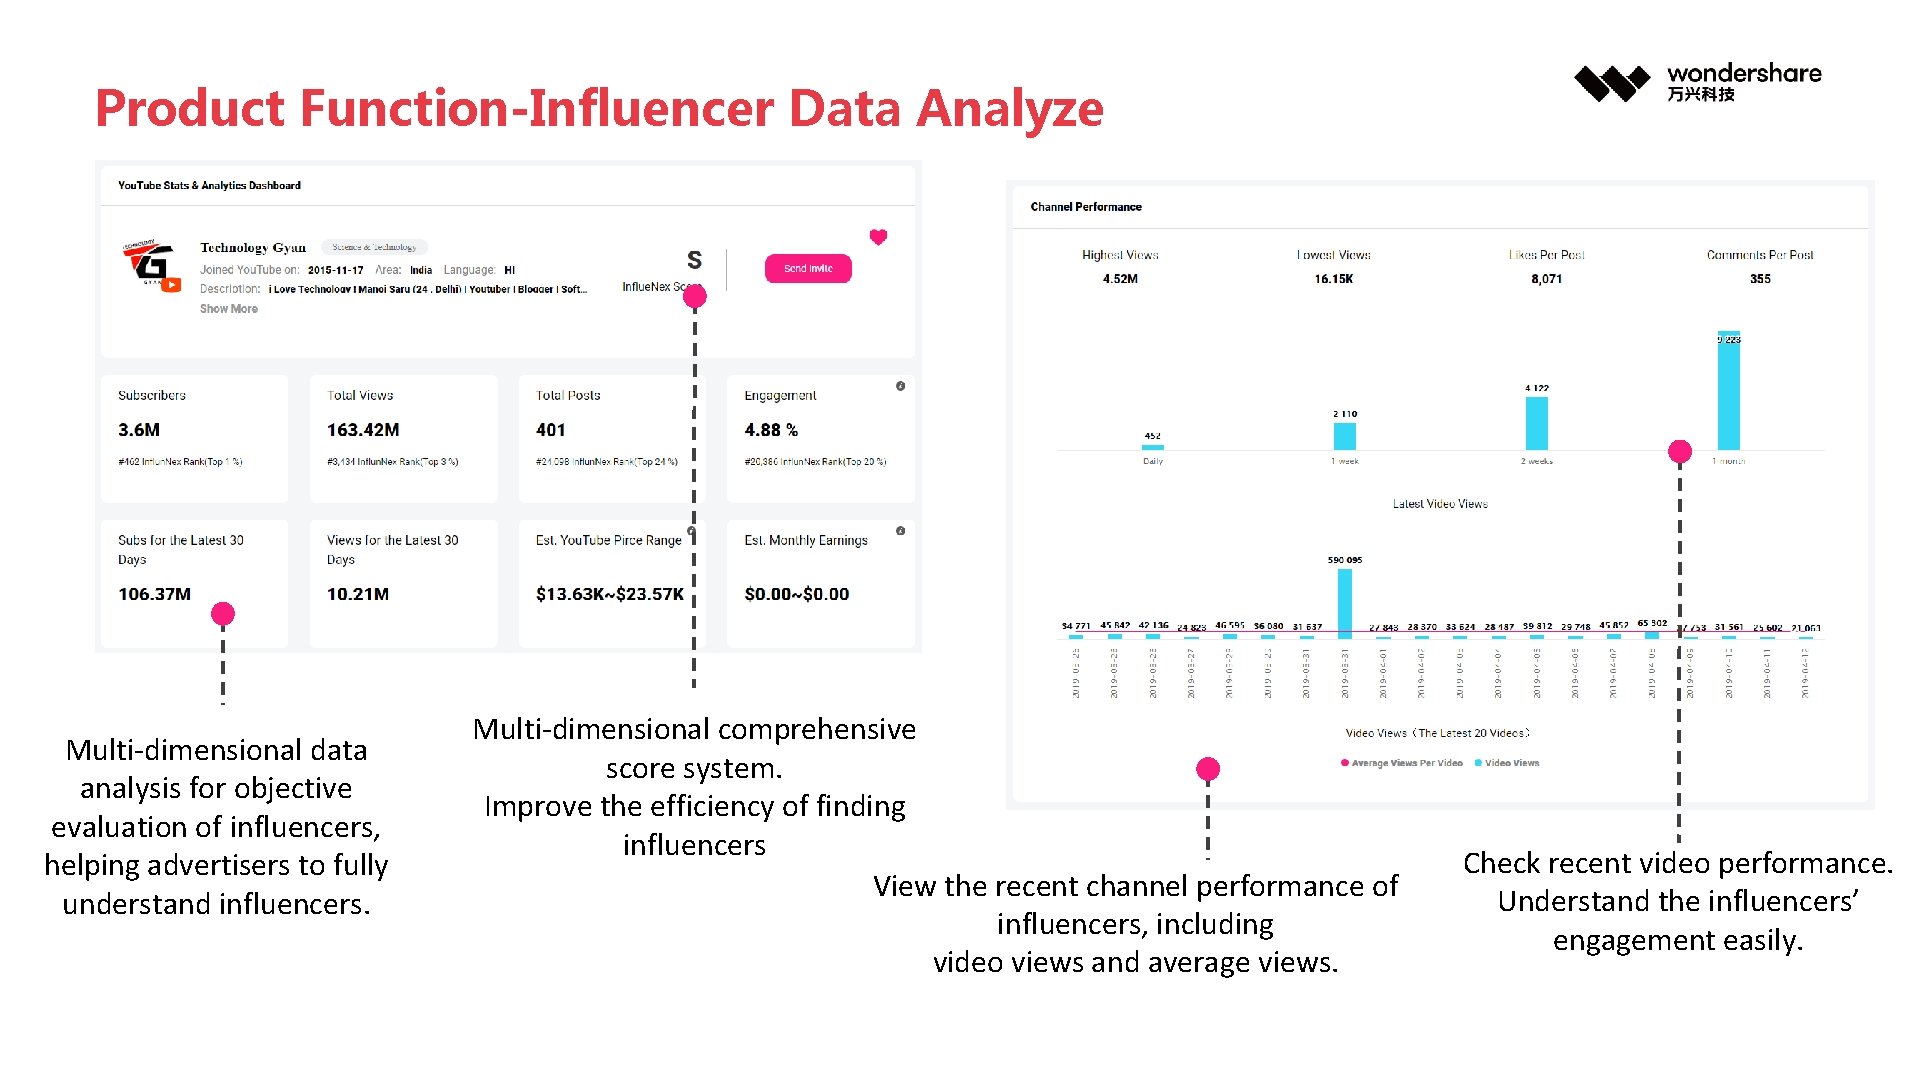 Product Function-Influencer Data Analyze Multi-dimensional data analysis for objective evaluation of influencers, helping advertisers